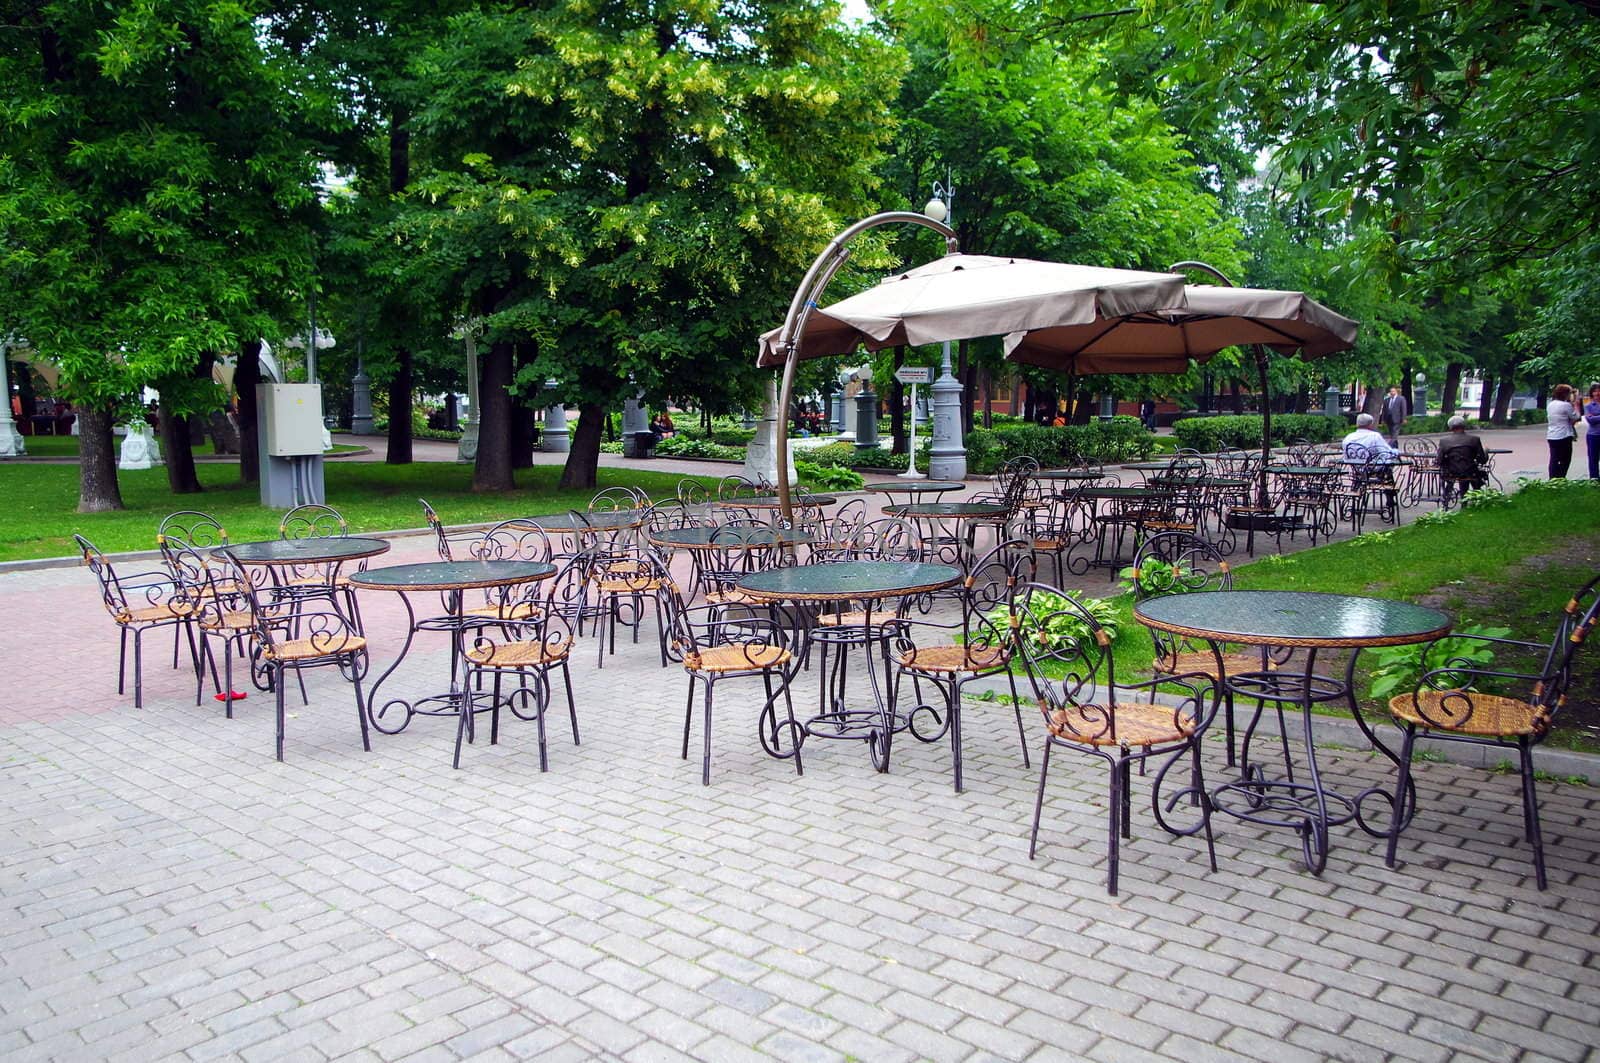 Cafe in the park Hermitage, Moscow, Russia by Stoyanov